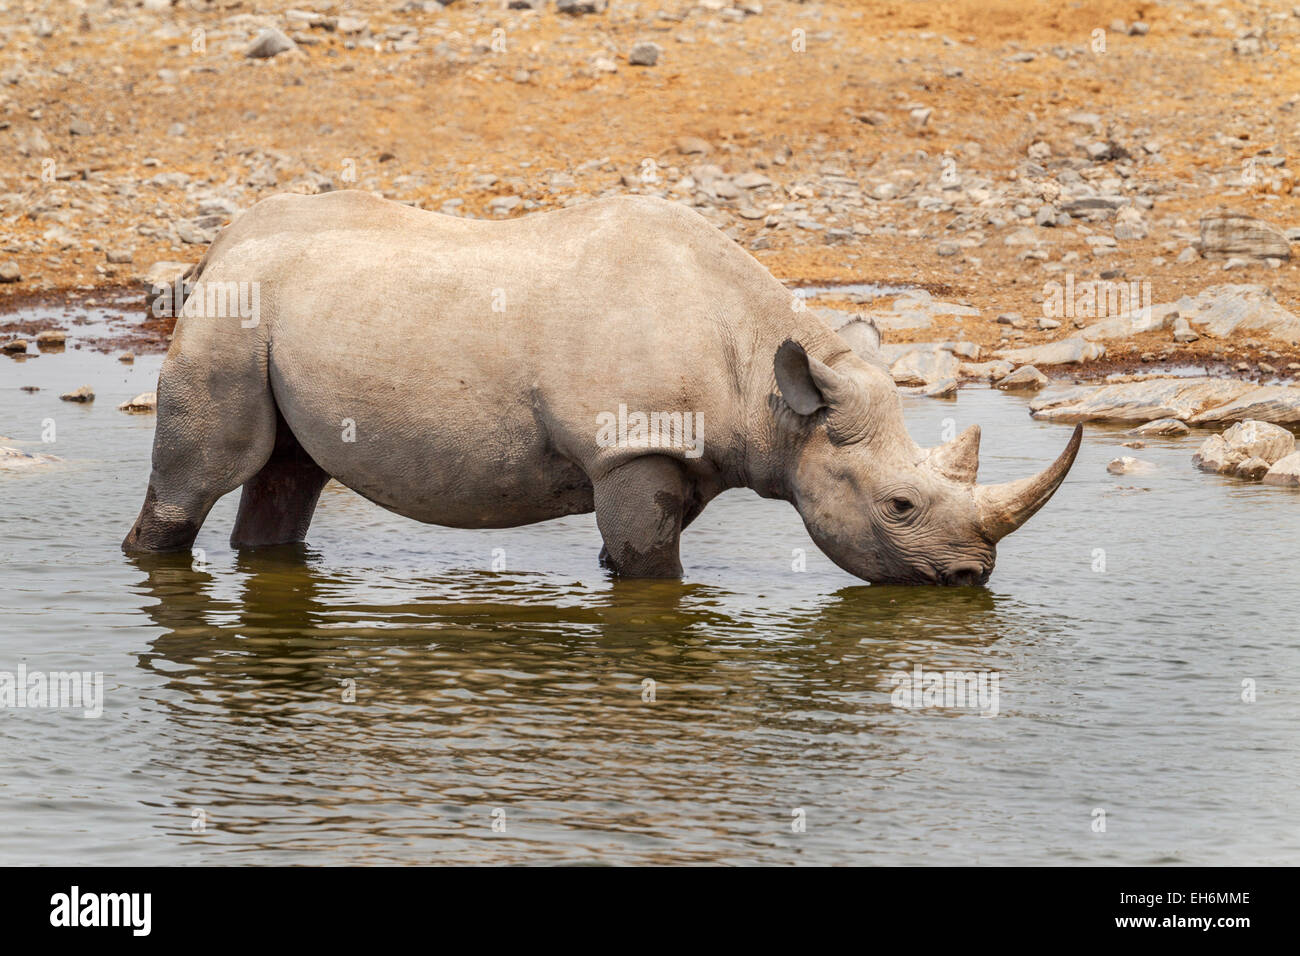 A black rhino standing in a water hole in Etosha National Park, Namibia. Stock Photo